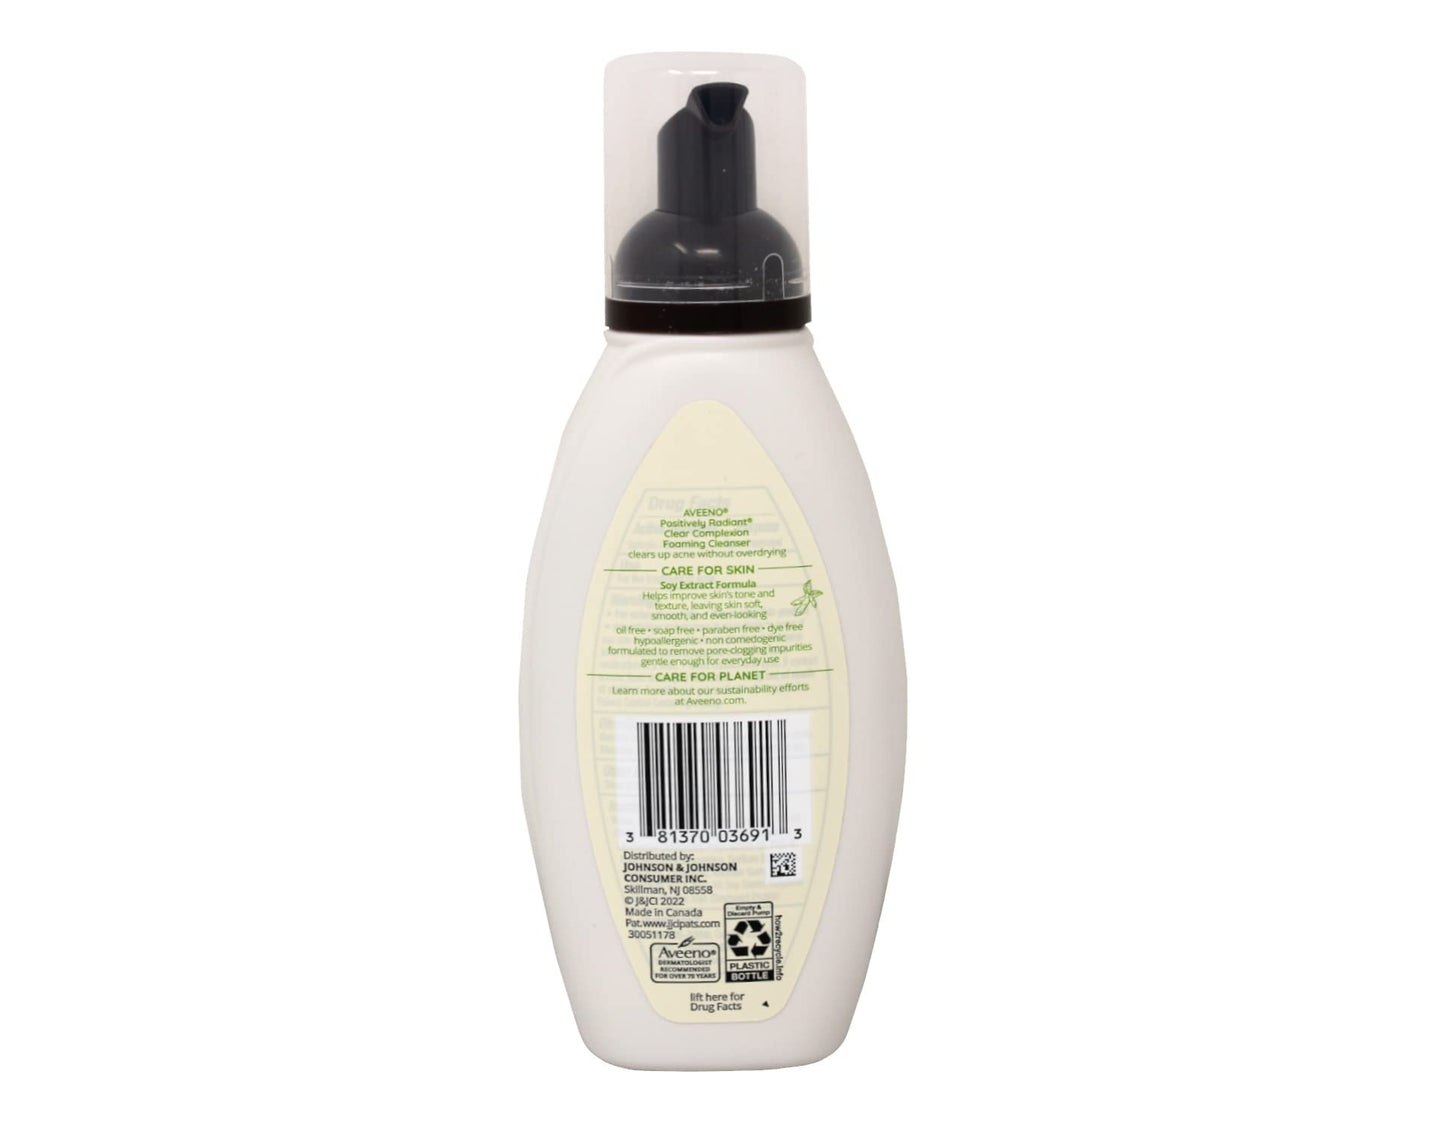 Aveeno Clear Complexion, Foaming Cleanser, 6 Fl Oz